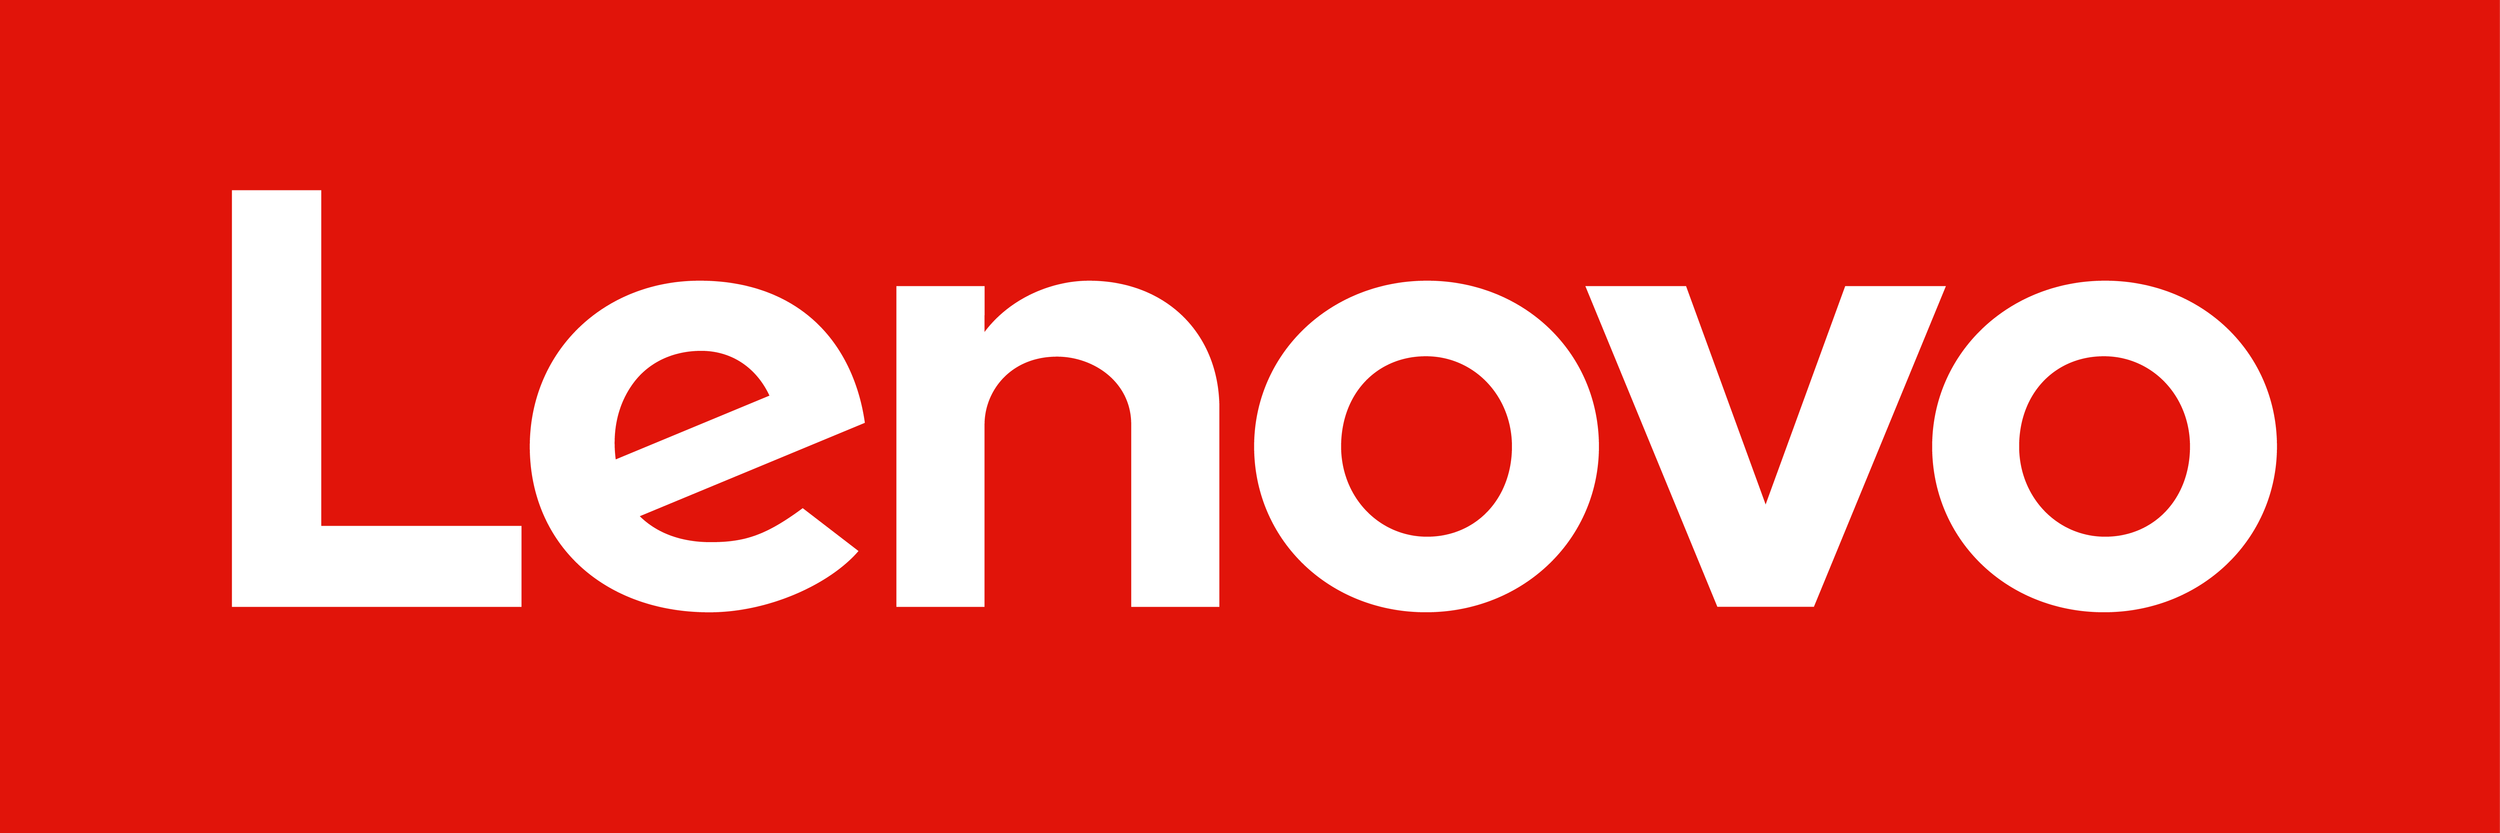 Lenovo Red.png